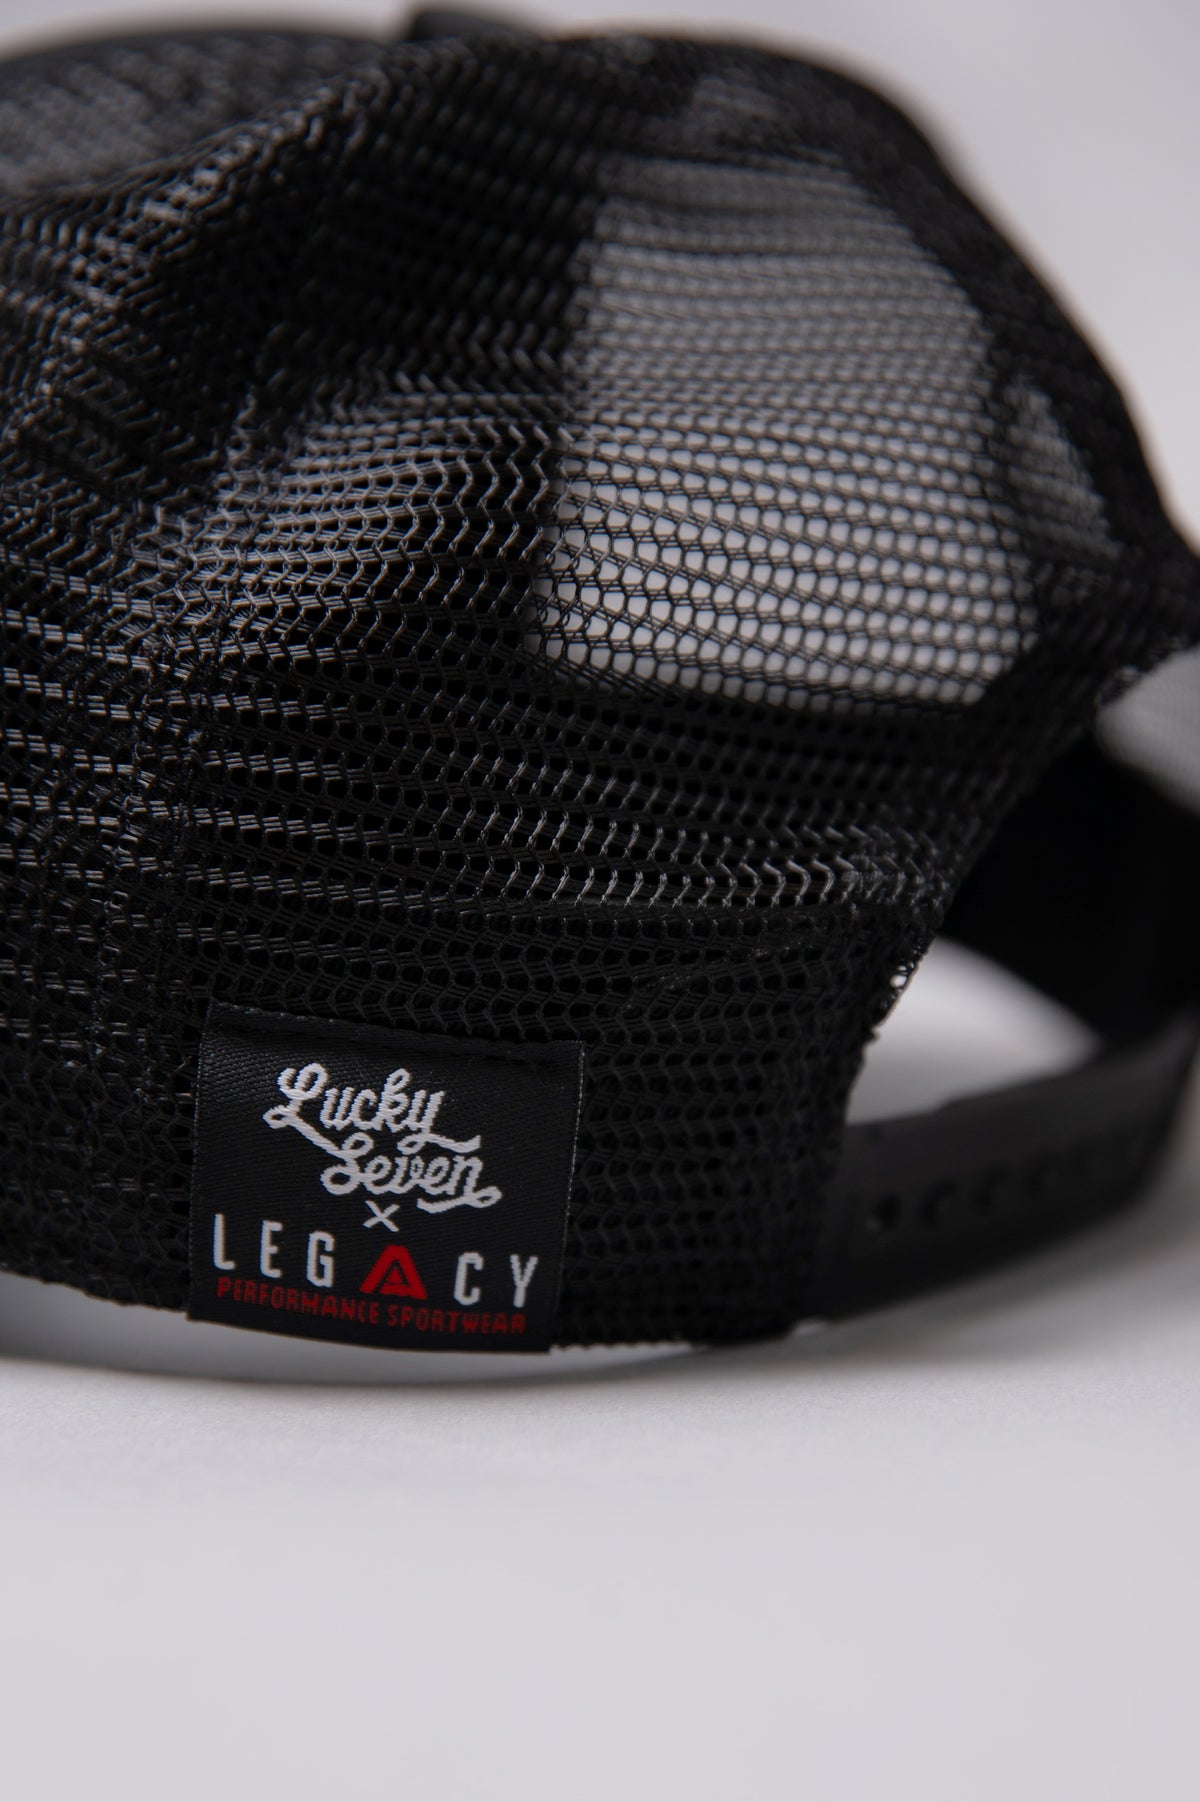 Legacy Trucker Black and Red